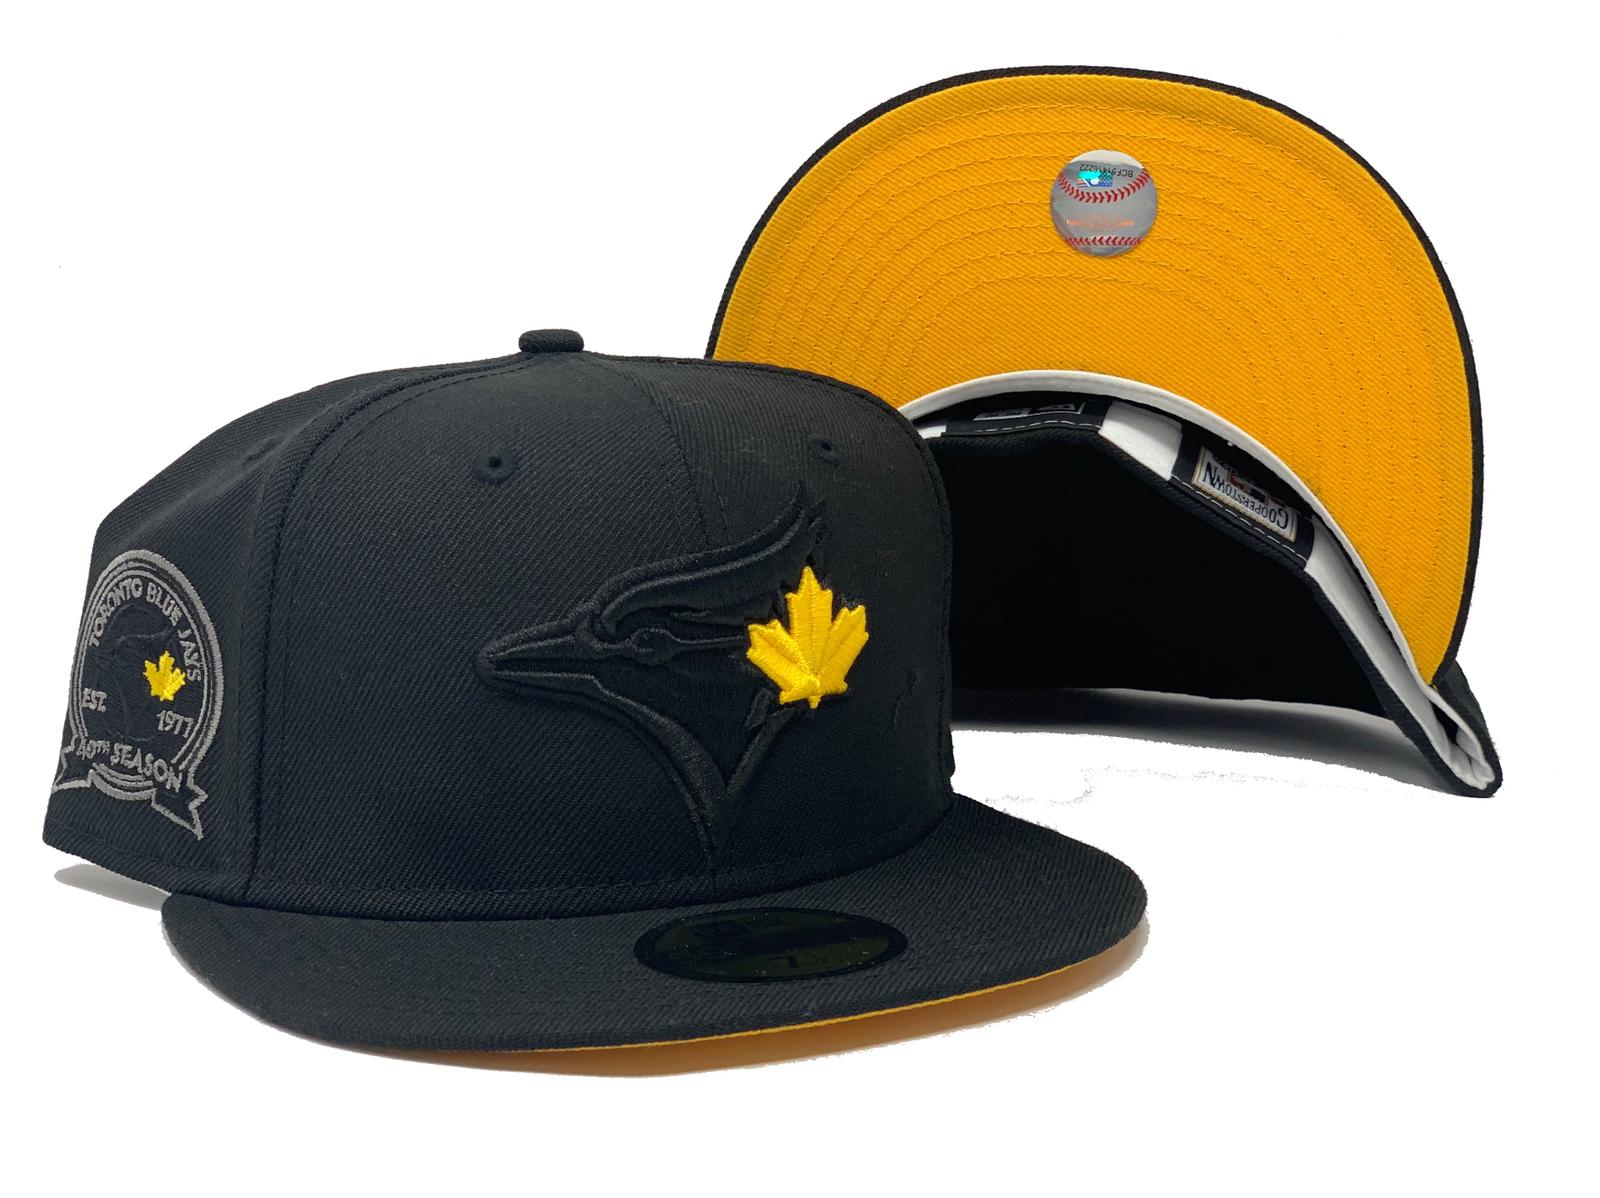 black blue jays hat with red maple leaf